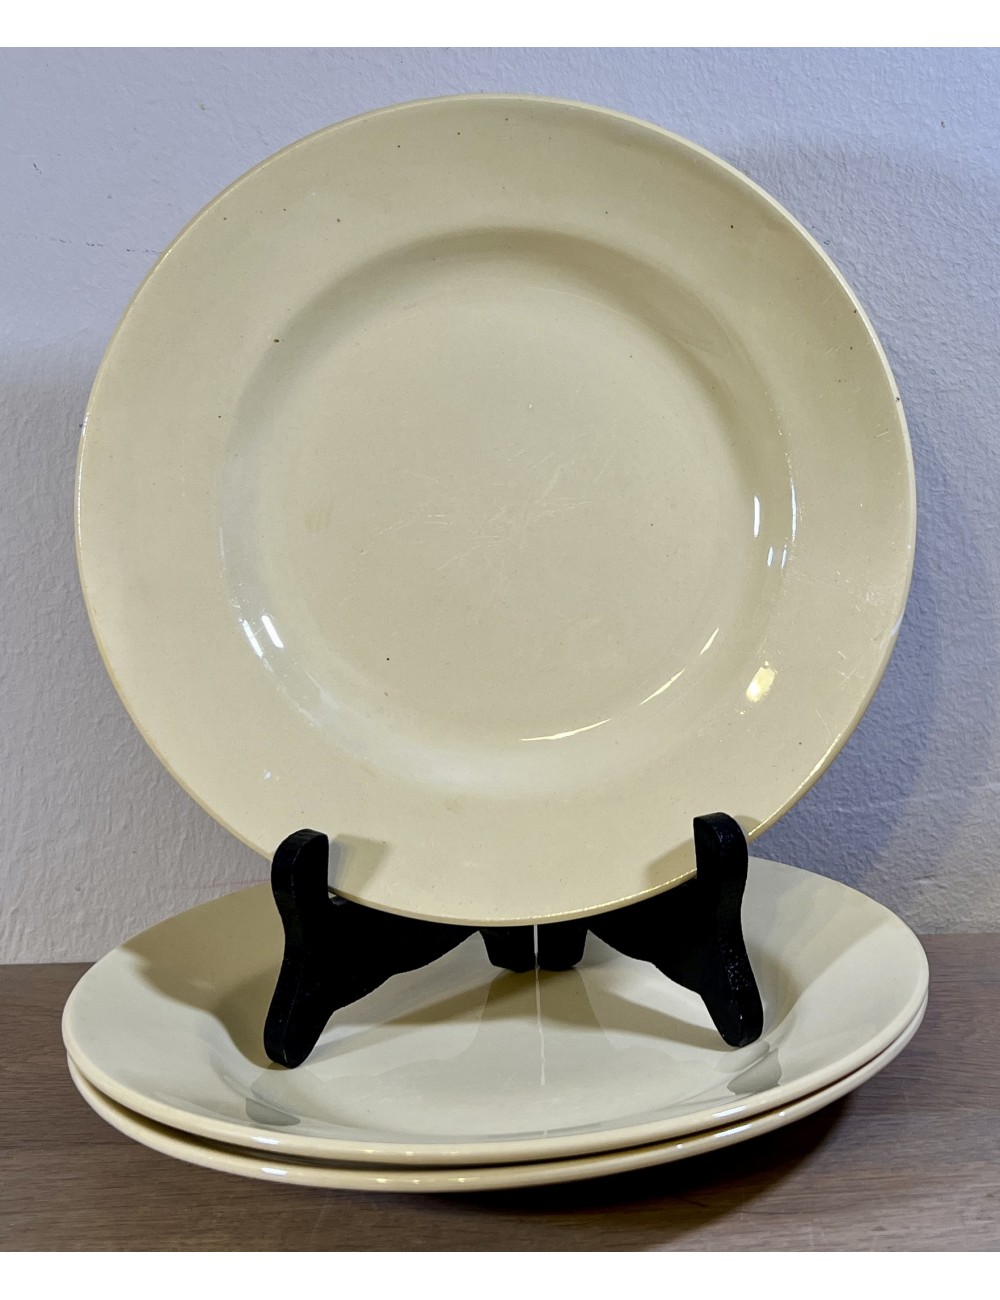 Breakfast plate / Dessert plate - Boch - executed in cream/beige color